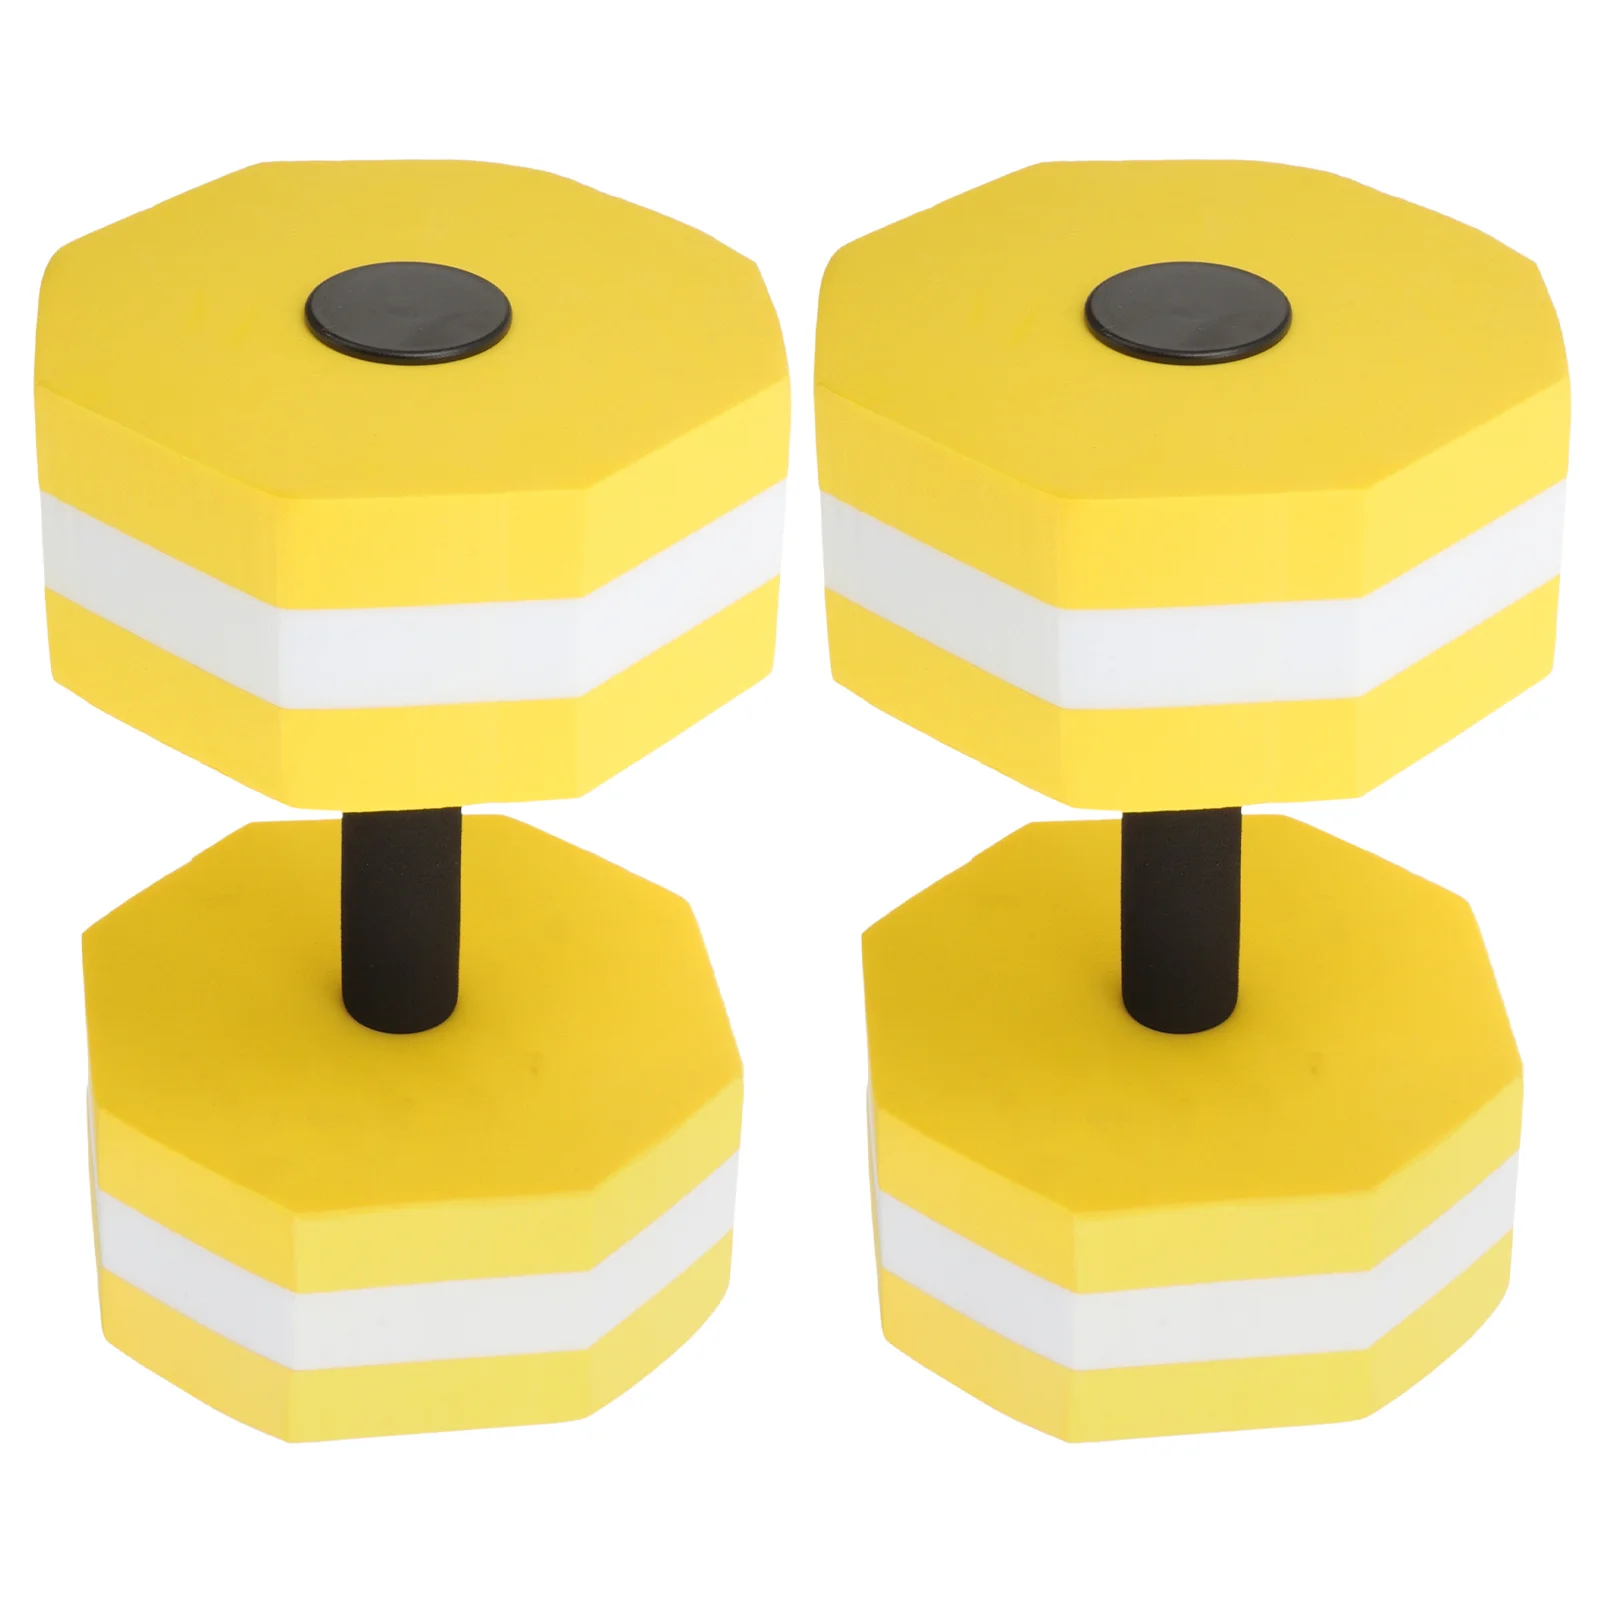 

2Pcs Water Weight Octagon Dumbbell Dumbbells Water Fitness Equipment Weights